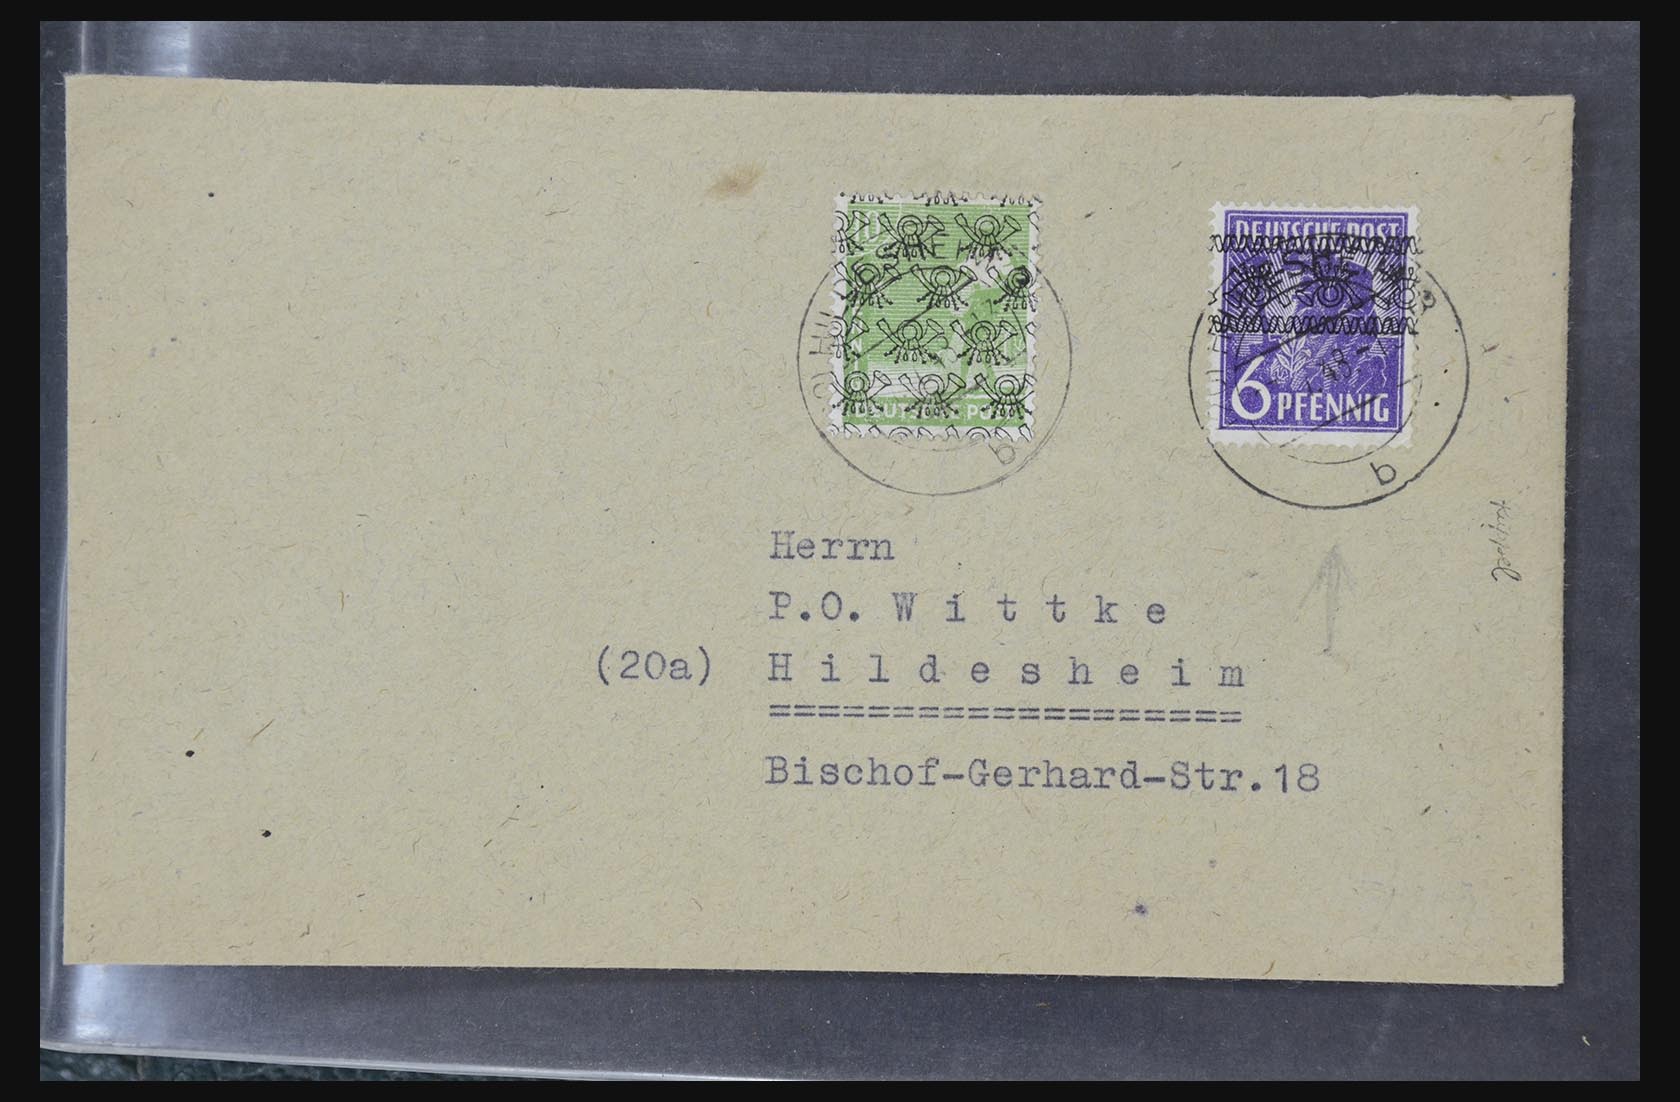 31581 048 - 31581 Germany covers and FDC's 1945-1981.